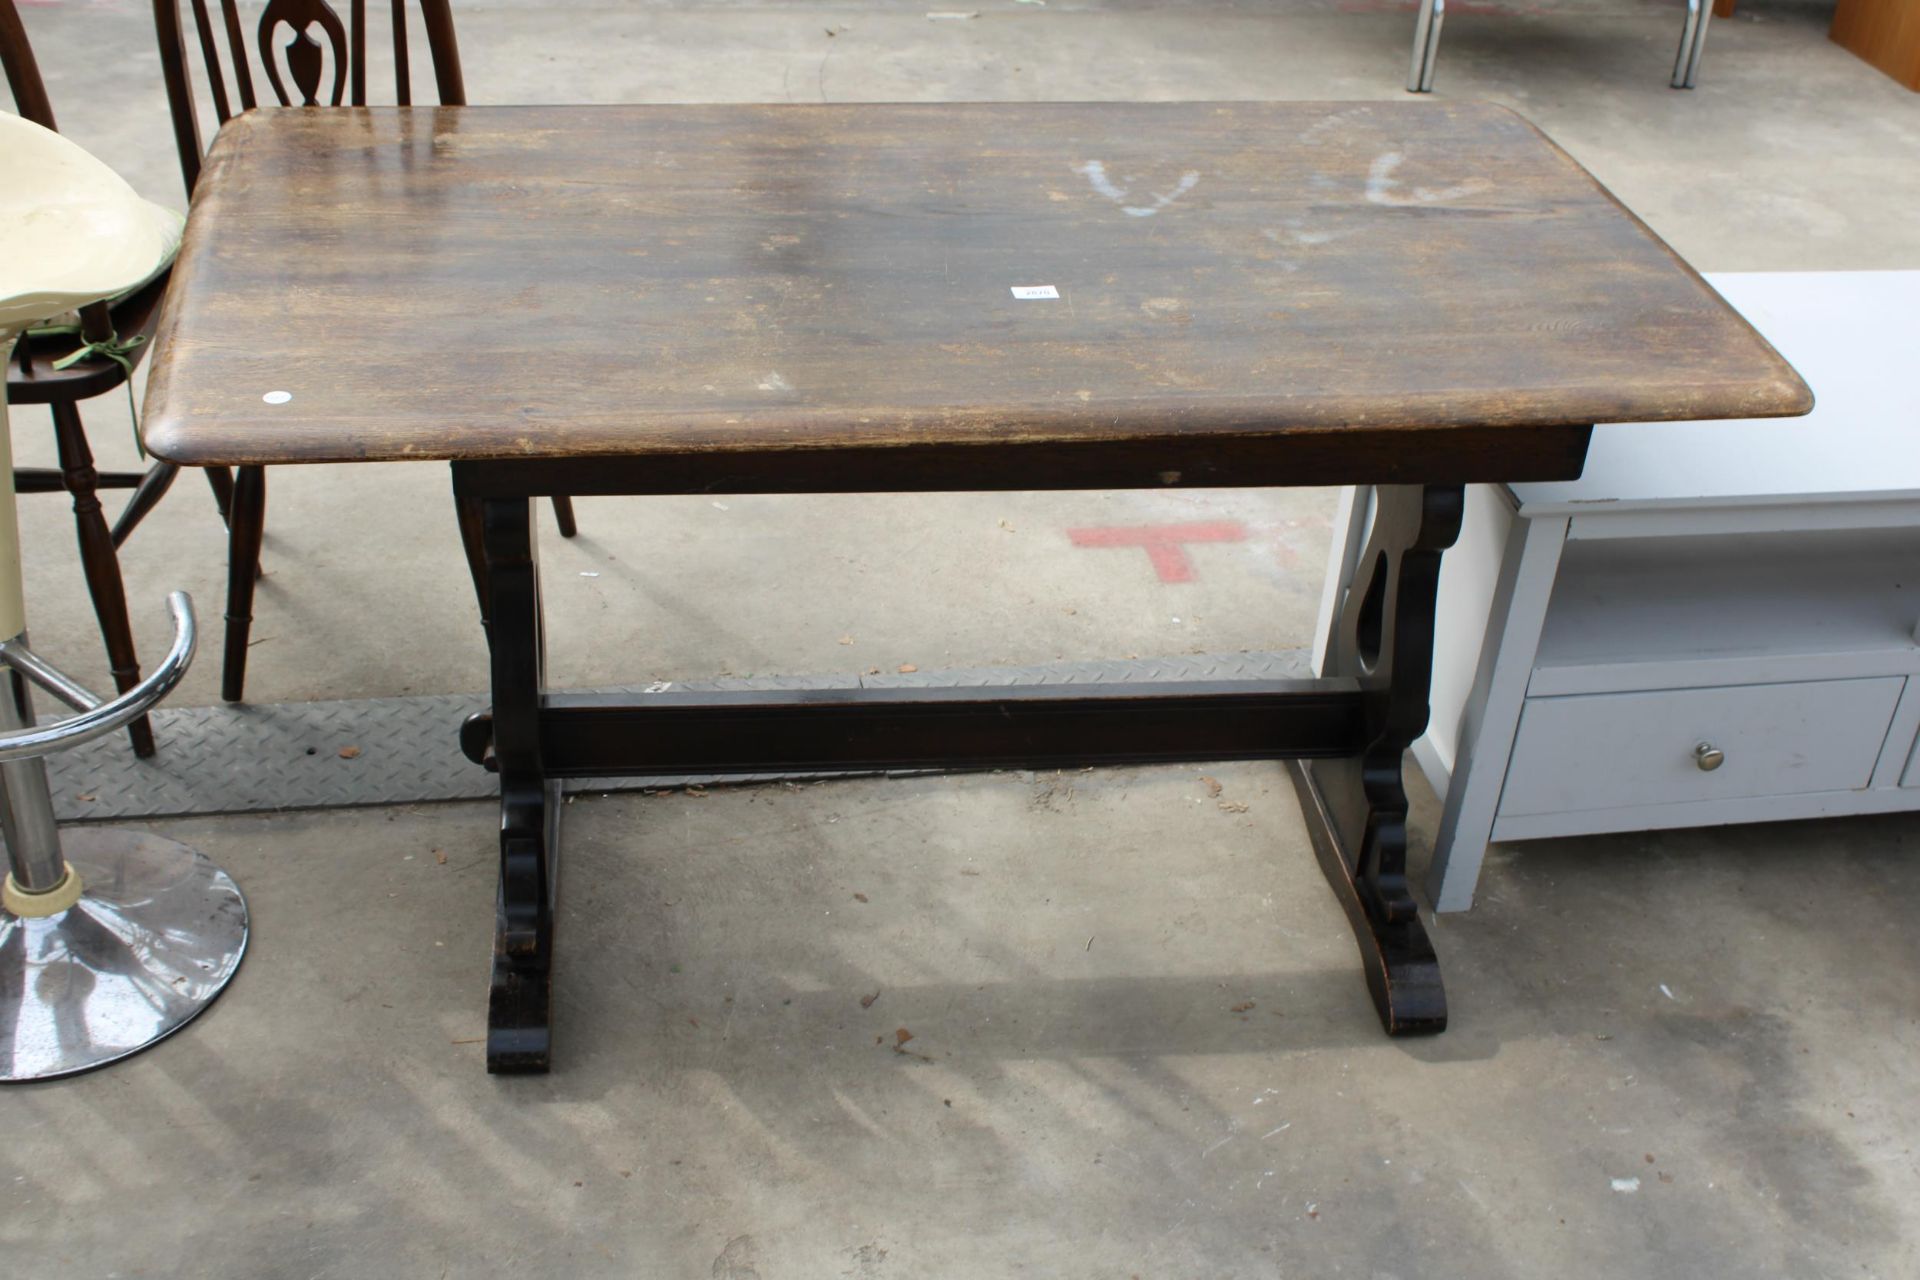 AN OAK REFECTORY STYLE DINING TABLE, 54" X 28"